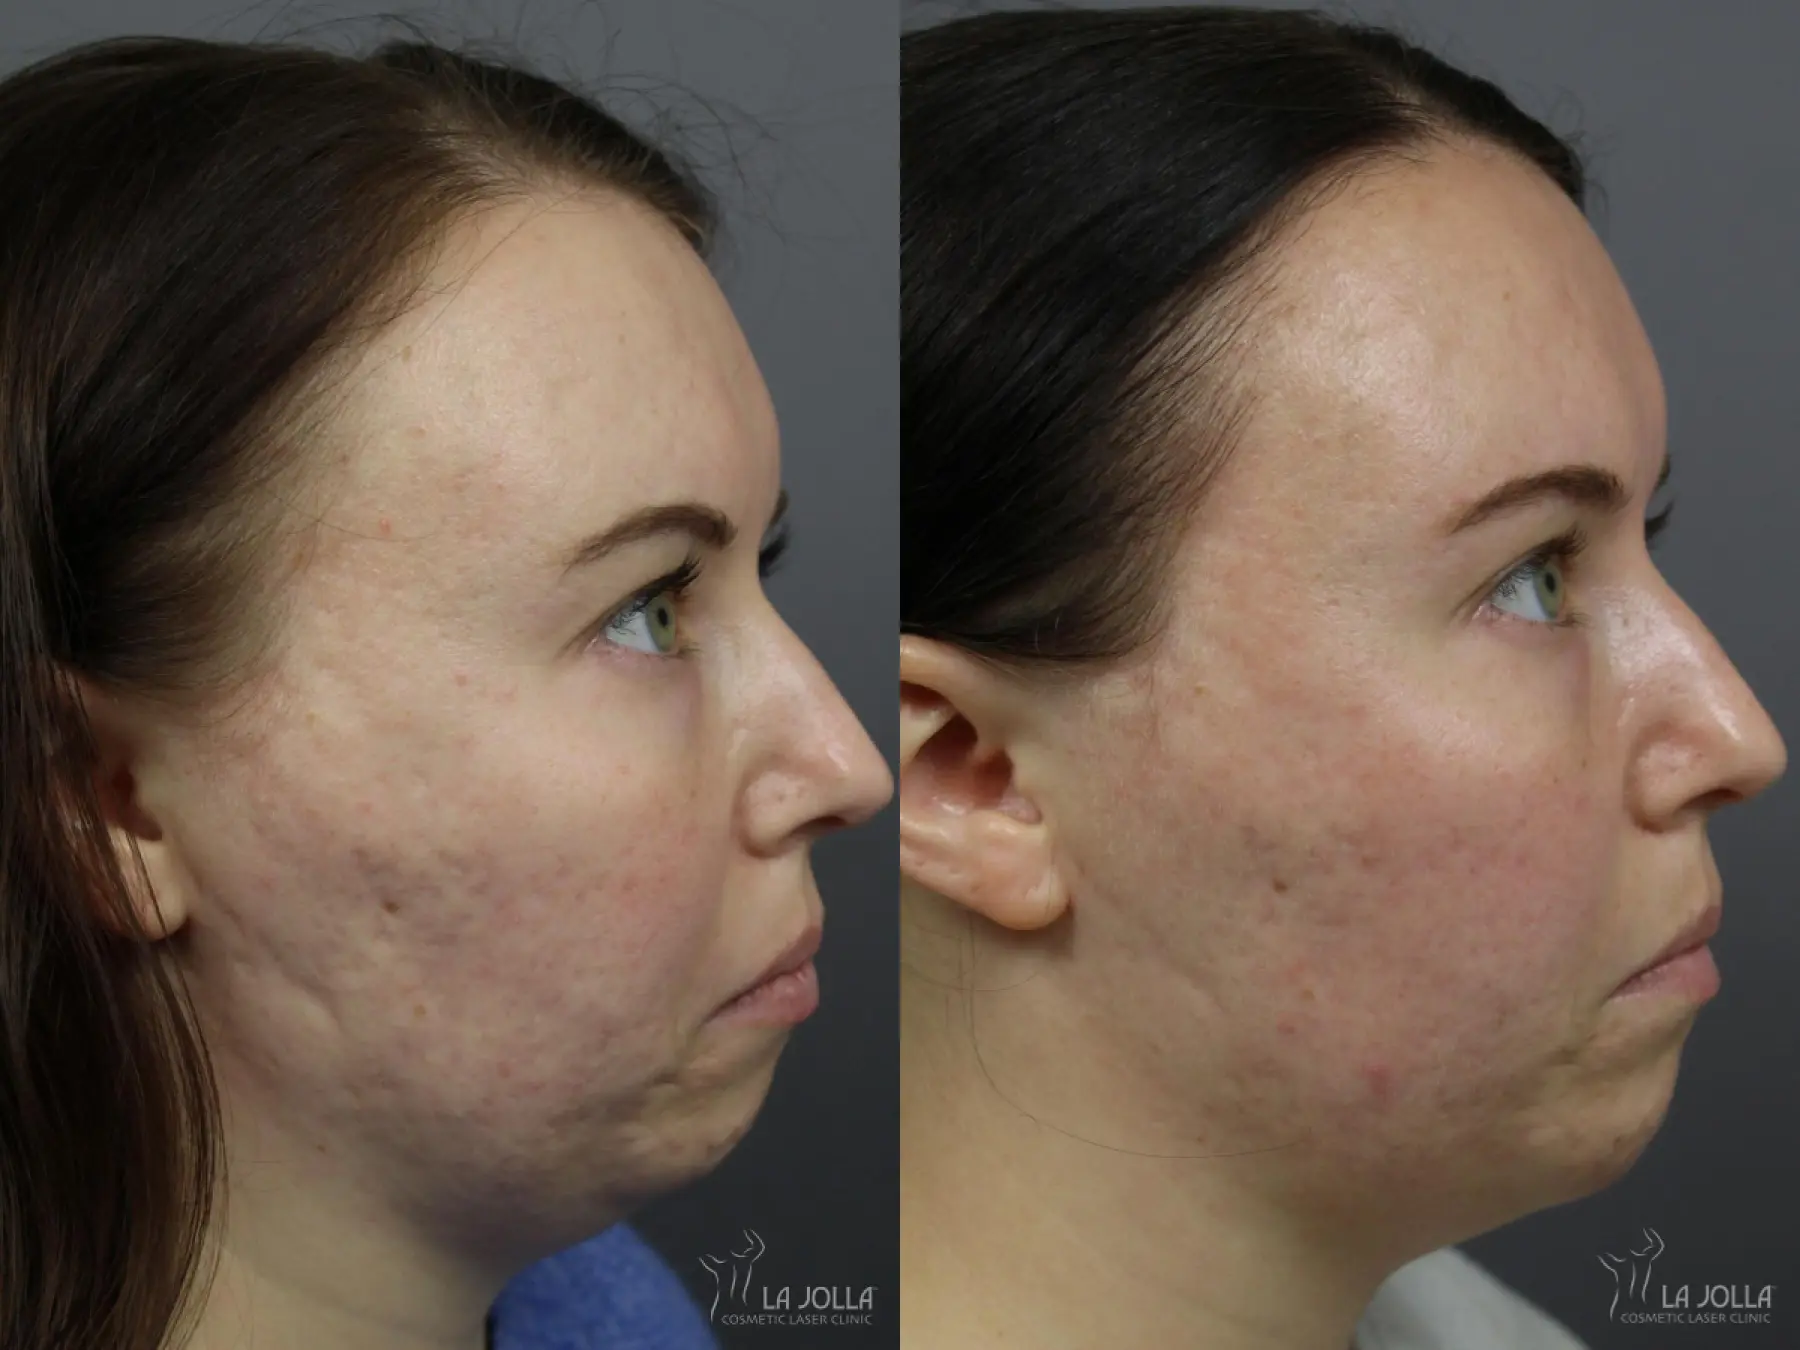 Radiesse®: Patient 1 - Before and After 1